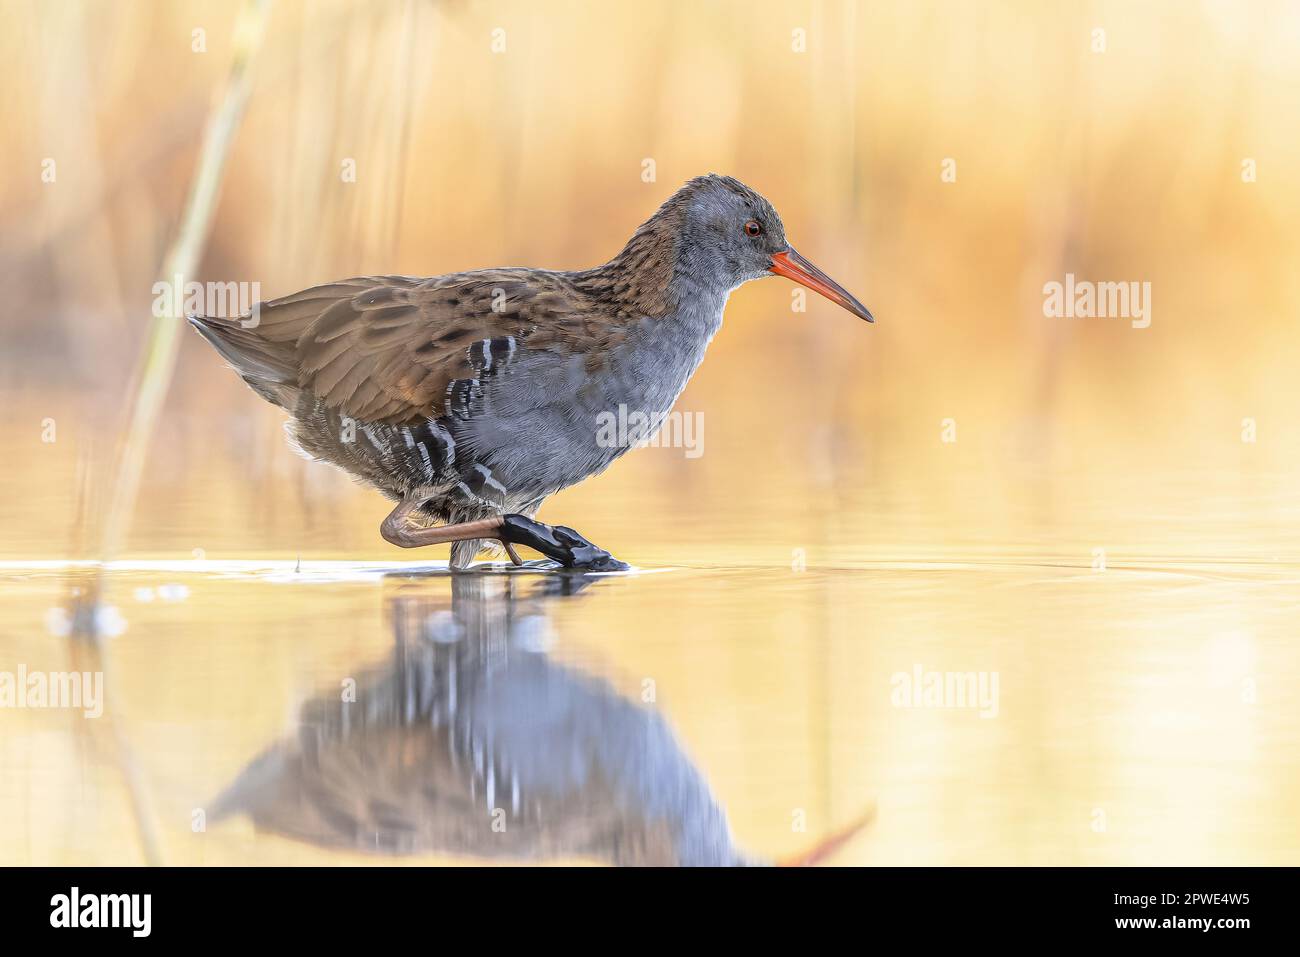 Water Rail (Rallus aquaticus) on Beautiful Background. This bird breeds in well-vegetated wetlands across Europe, Asia and North Africa. Wildlife Scen Stock Photo